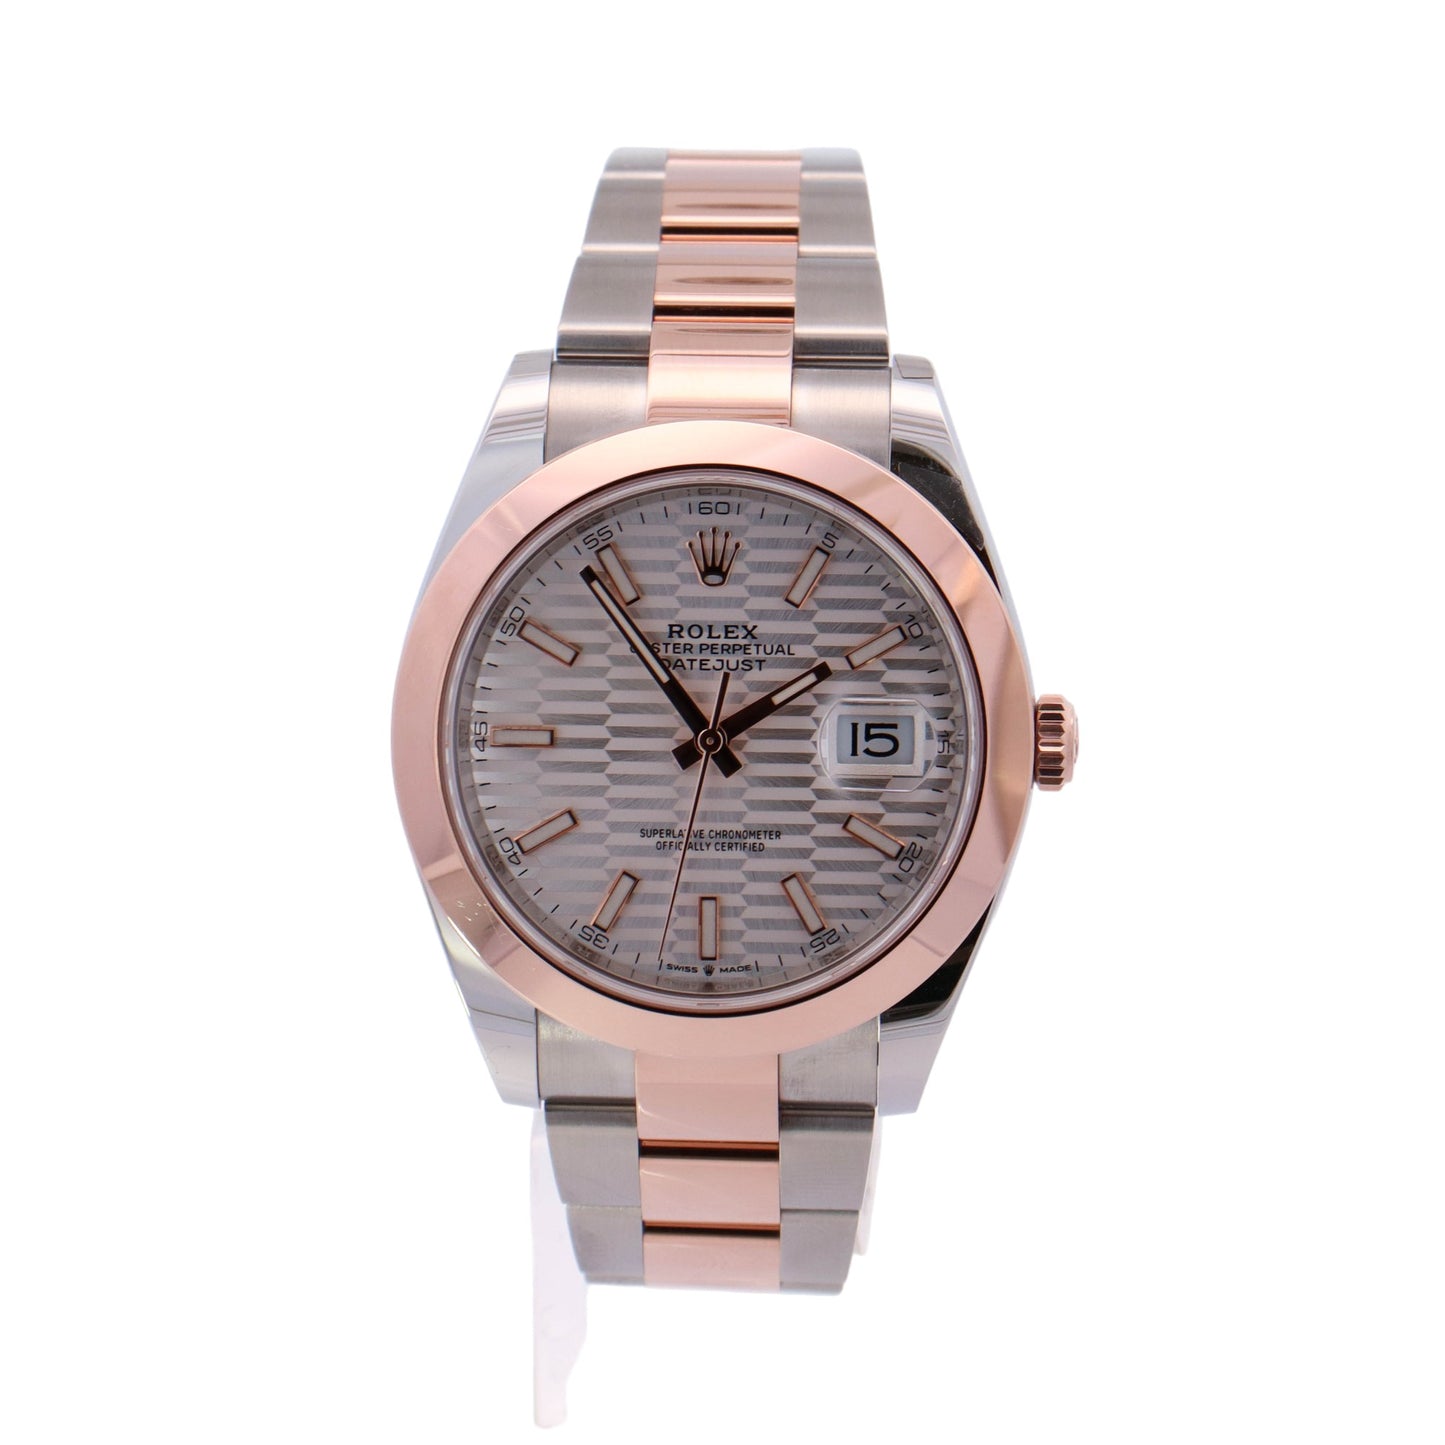 Rolex Datejust Two-Tone Stainless Steel & Rose Gold 41mm Silver Motif Dial Watch Reference# 126301 - Happy Jewelers Fine Jewelry Lifetime Warranty